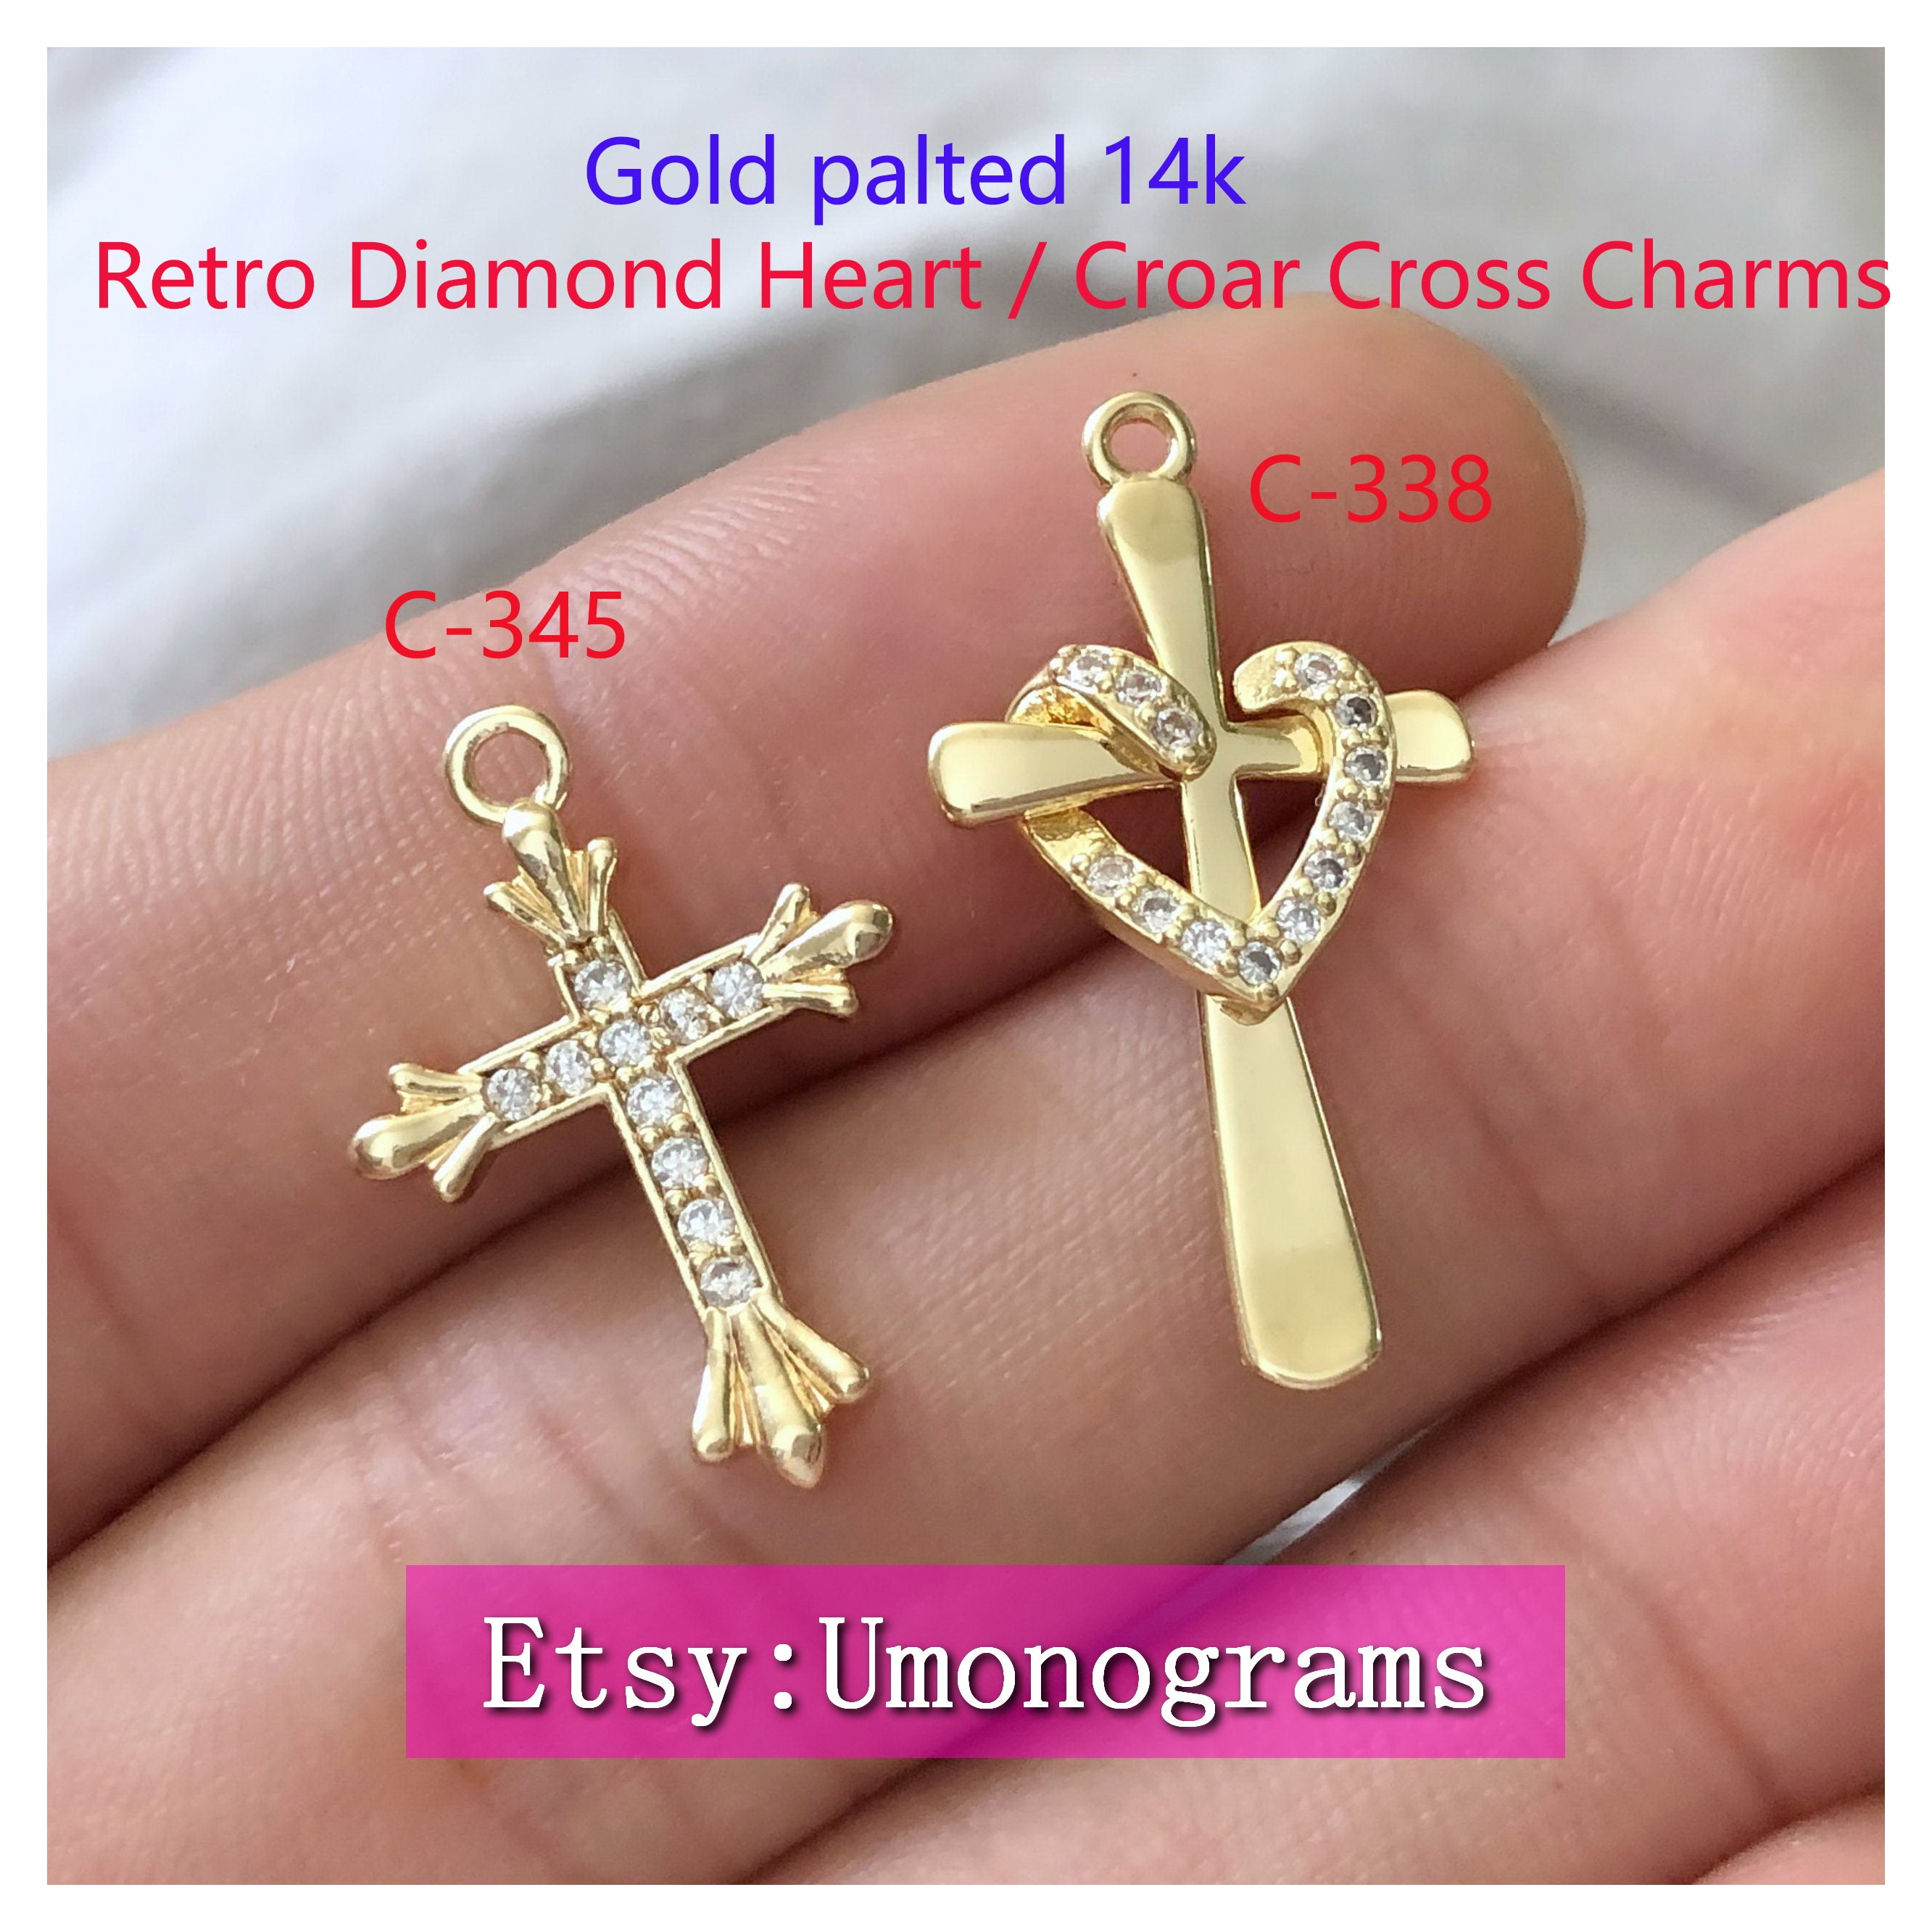 Hicarer 50 Pieces Stone Cross Gemstone Pendant Charms Cross Quartz Crystal  Charms for Necklace Earring Bracelet Jewelry Making